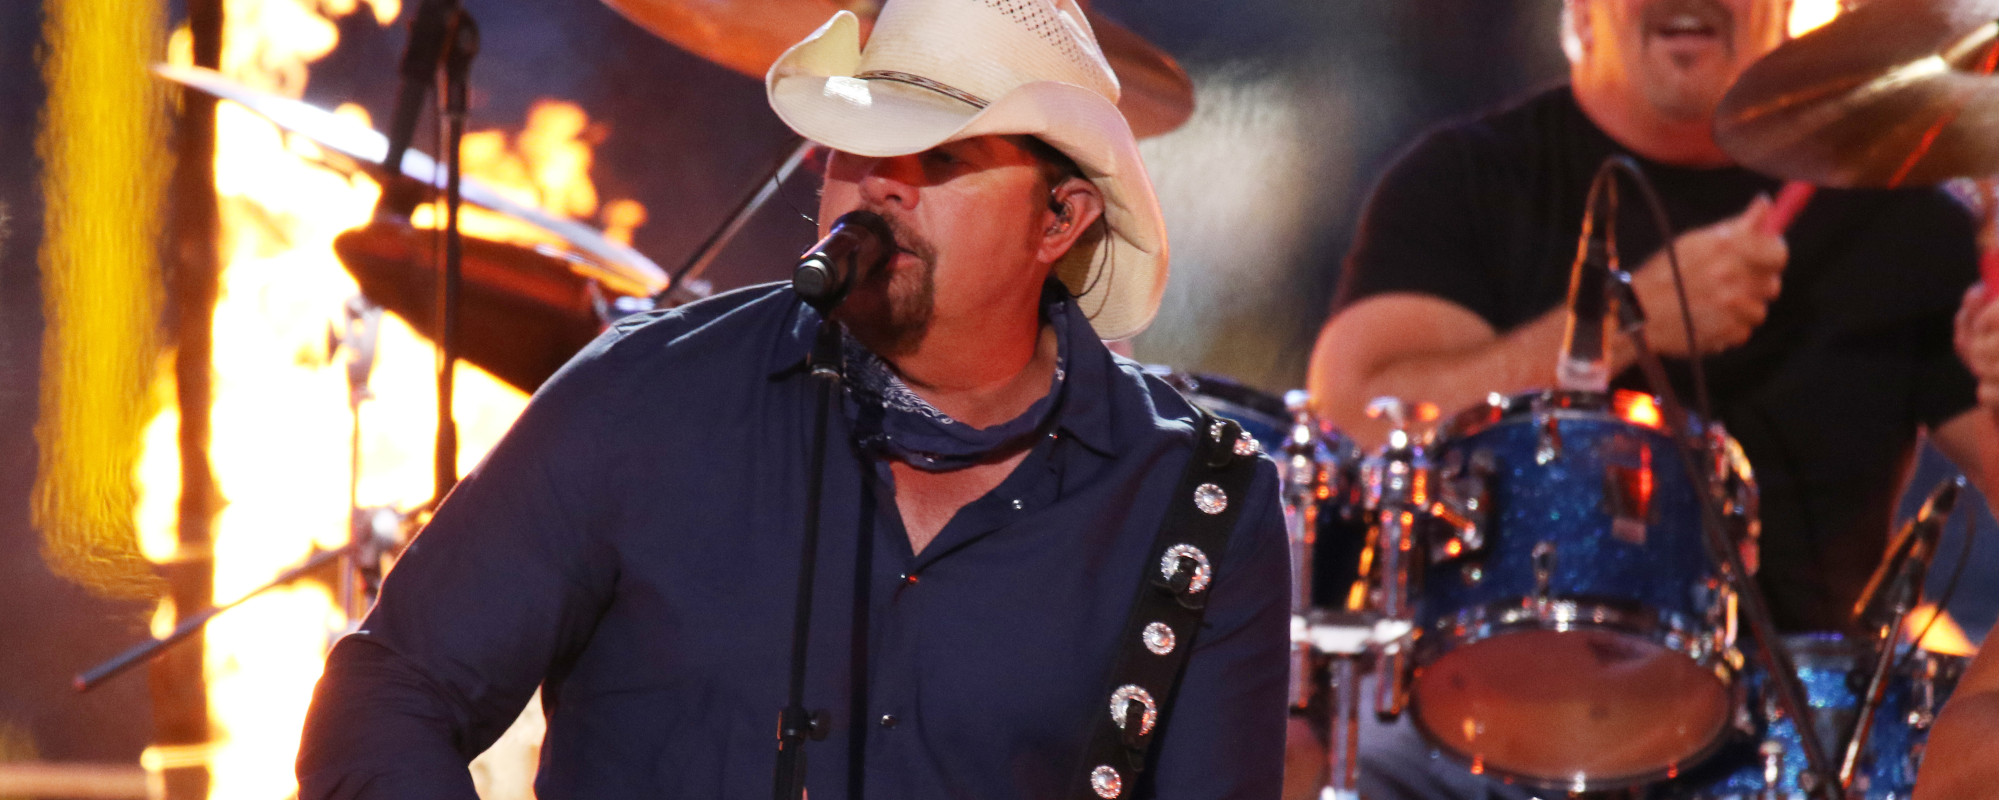 Toby Keith’s 2008 Greatest Hits Album Tops Charts Following Country Star’s Death